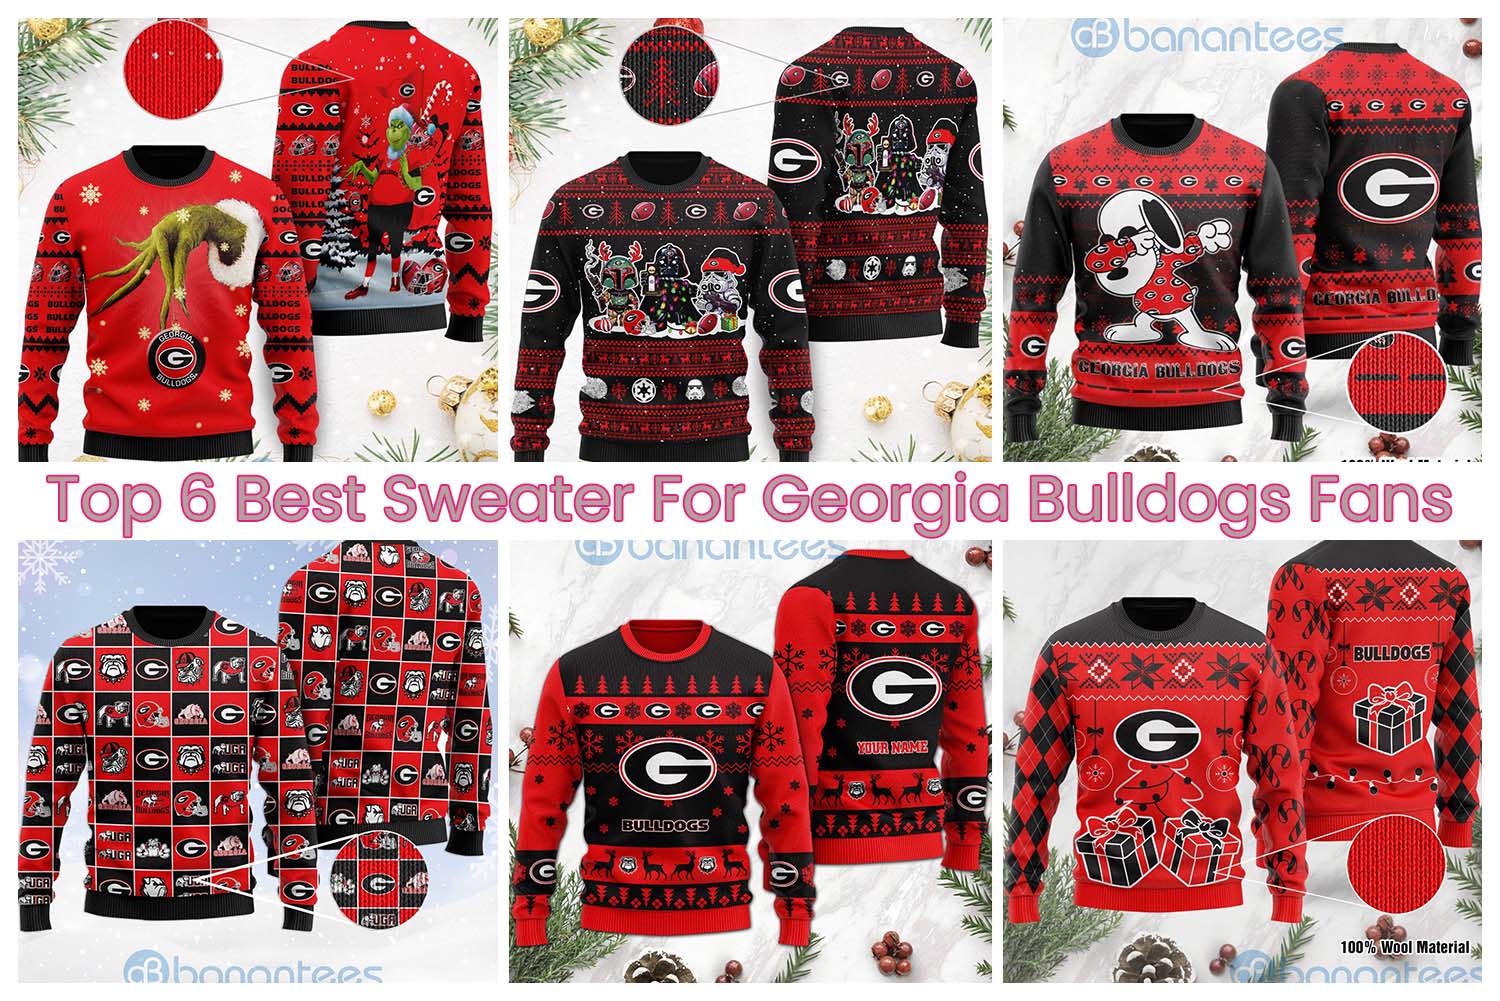 Top 6 Best Sweater For Georgia Bulldogs Fans